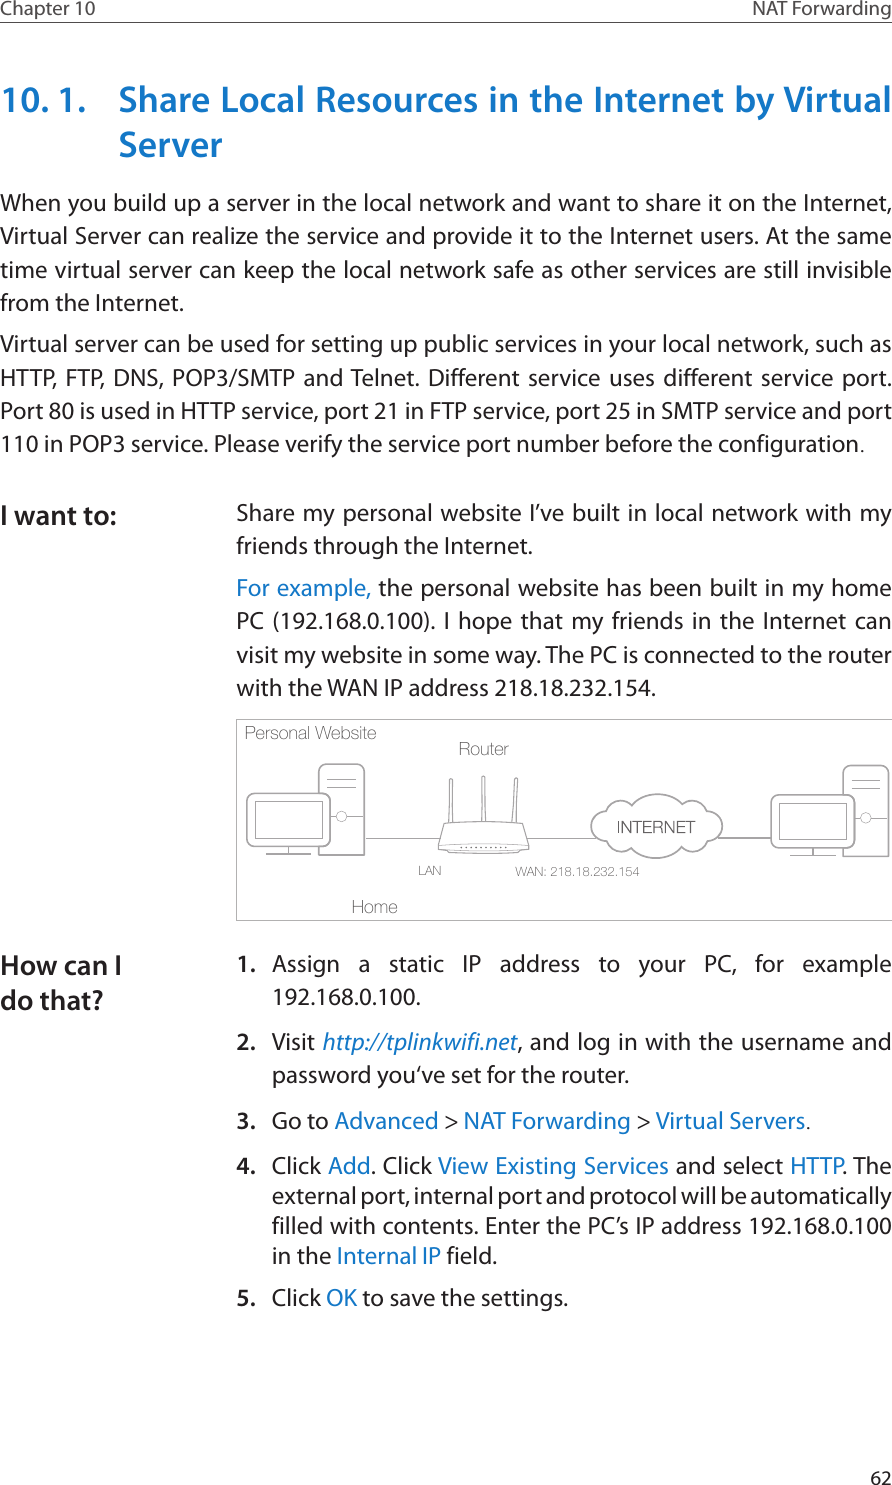 62Chapter 10 NAT Forwarding10. 1.  Share Local Resources in the Internet by Virtual ServerWhen you build up a server in the local network and want to share it on the Internet, Virtual Server can realize the service and provide it to the Internet users. At the same time virtual server can keep the local network safe as other services are still invisible from the Internet.Virtual server can be used for setting up public services in your local network, such as HTTP, FTP, DNS, POP3/SMTP and Telnet. Different service uses different service port. Port 80 is used in HTTP service, port 21 in FTP service, port 25 in SMTP service and port 110 in POP3 service. Please verify the service port number before the configuration.Share my personal website I’ve built in local network with my friends through the Internet.For example, the personal website has been built in my home PC (192.168.0.100). I hope that my friends in the Internet can visit my website in some way. The PC is connected to the router with the WAN IP address 218.18.232.154.Router WAN: 218.18.232.154LANHomePersonal Website 1.  Assign a static IP address to your PC, for example 192.168.0.100.2.  Visit http://tplinkwifi.net, and log in with the username and password you‘ve set for the router.3.  Go to Advanced &gt; NAT Forwarding &gt; Virtual Servers.4.  Click Add. Click View Existing Services and select HTTP. The external port, internal port and protocol will be automatically filled with contents. Enter the PC’s IP address 192.168.0.100 in the Internal IP field.5.  Click OK to save the settings.I want to:How can I do that?